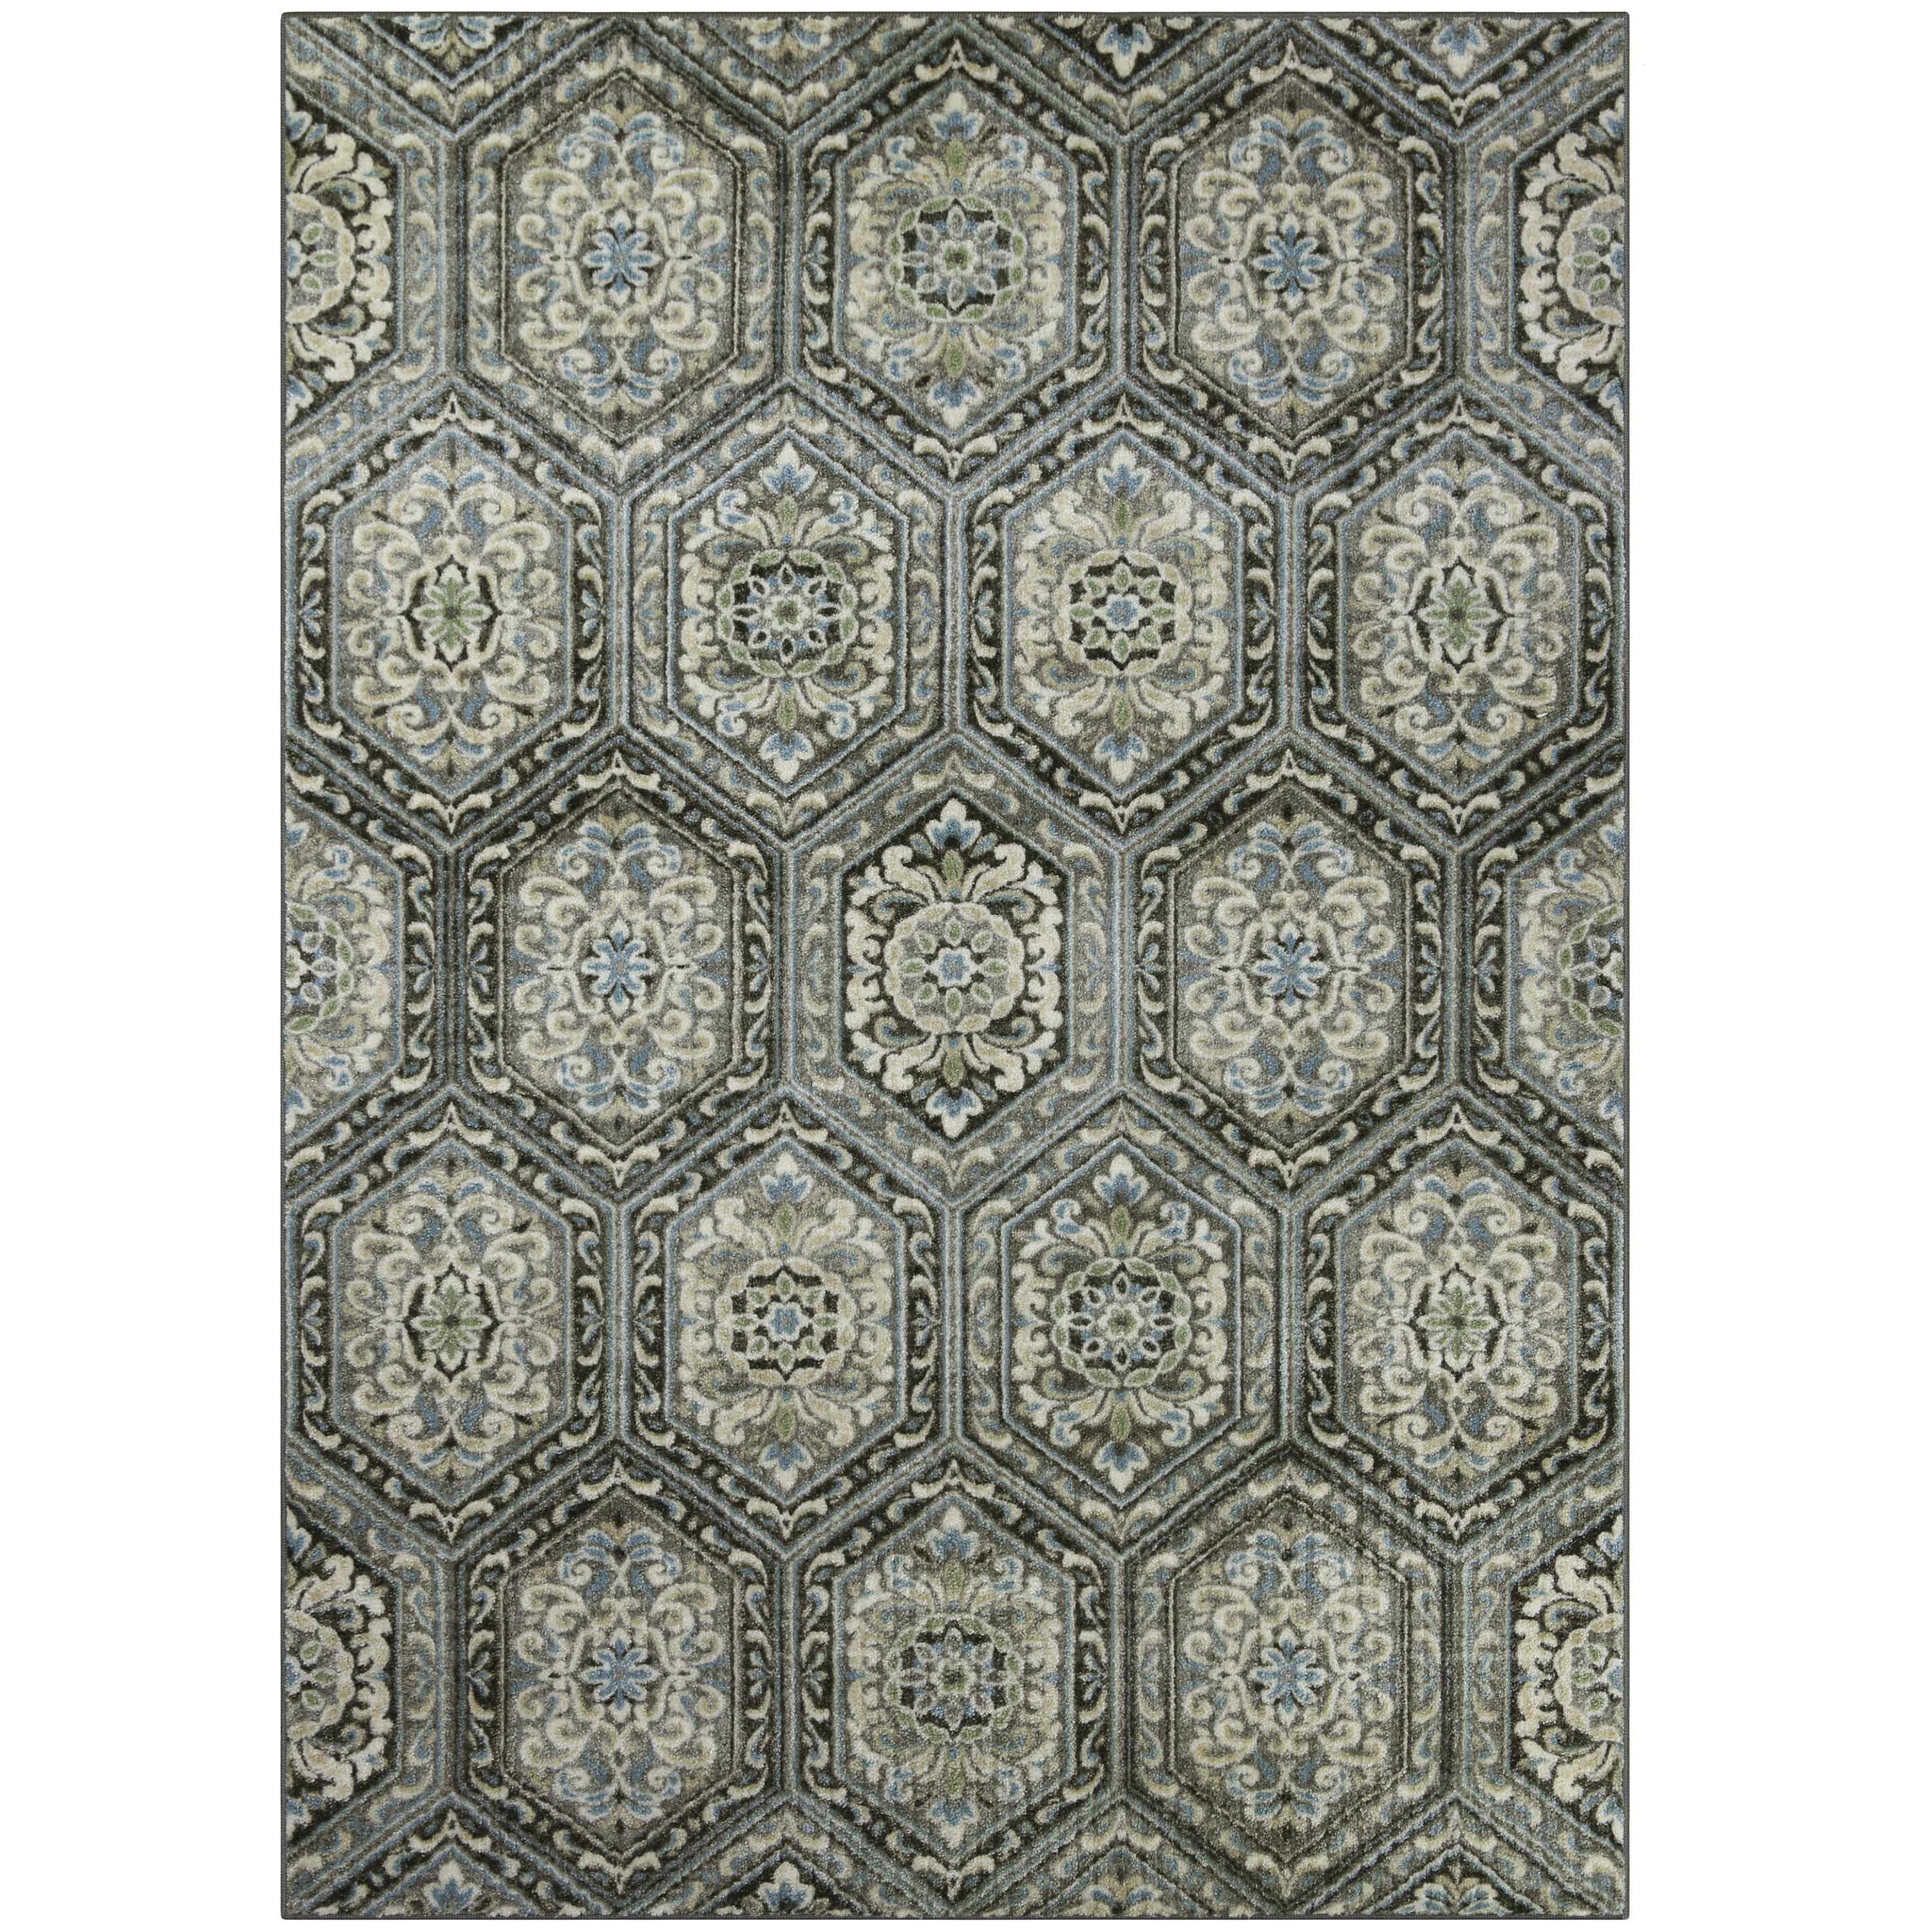 Blue Green Fl Botanical Area Rug, Blue And Green Area Rugs 5×7